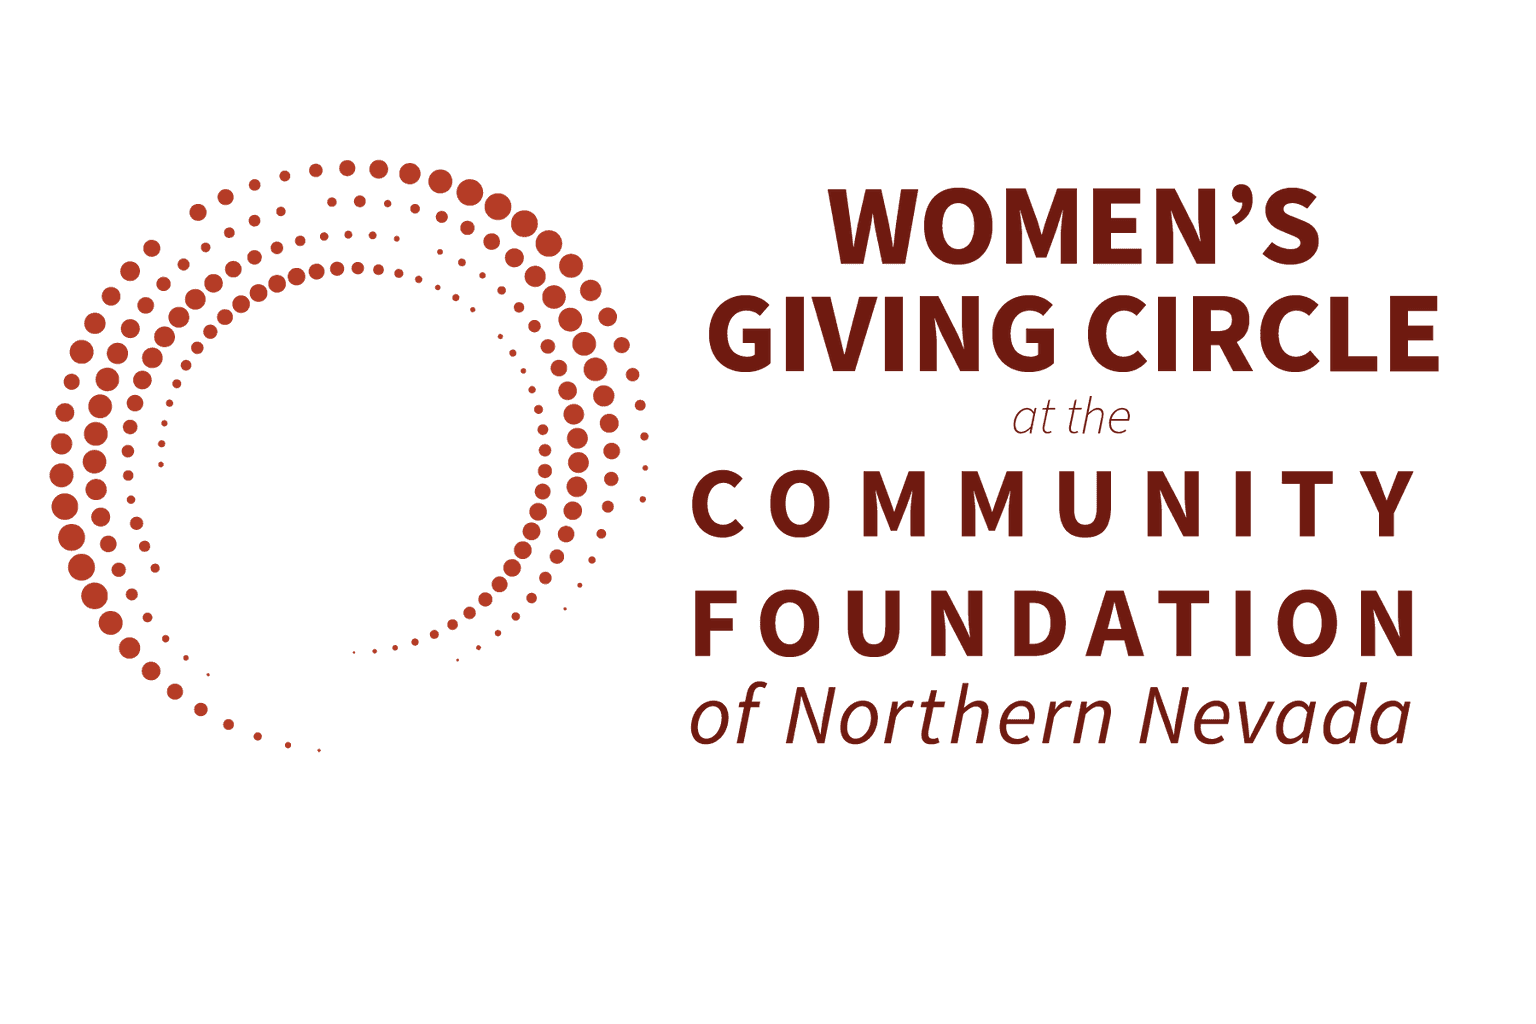 Women's Giving Circle at the Community Foundation of Northern Nevada